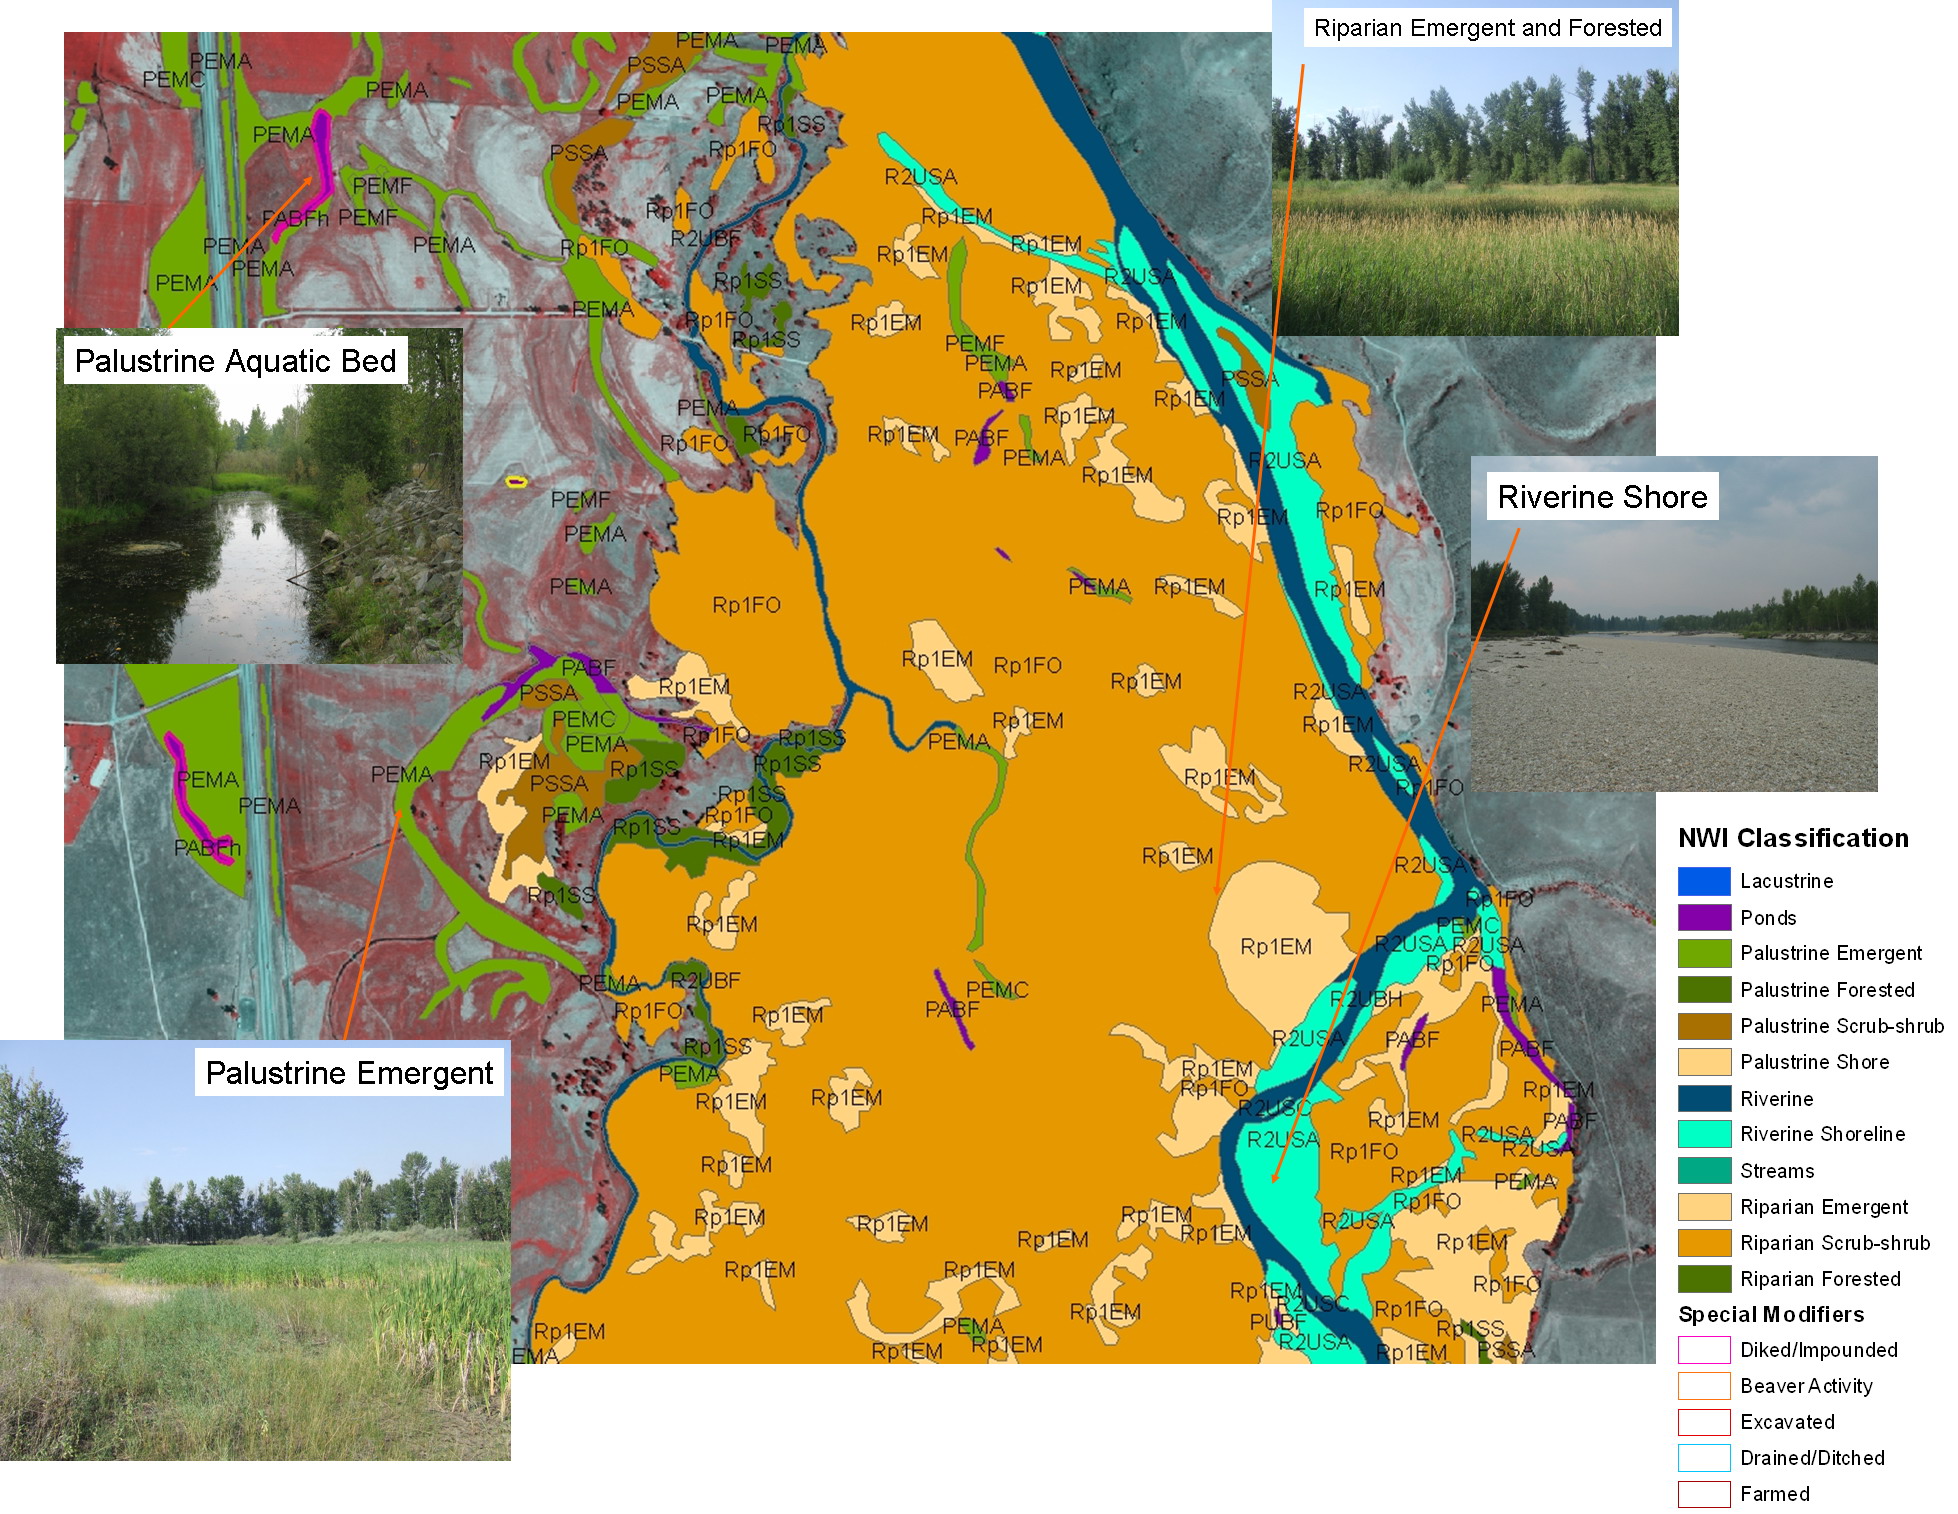 Example of wetland and riparian mapping in Montana.